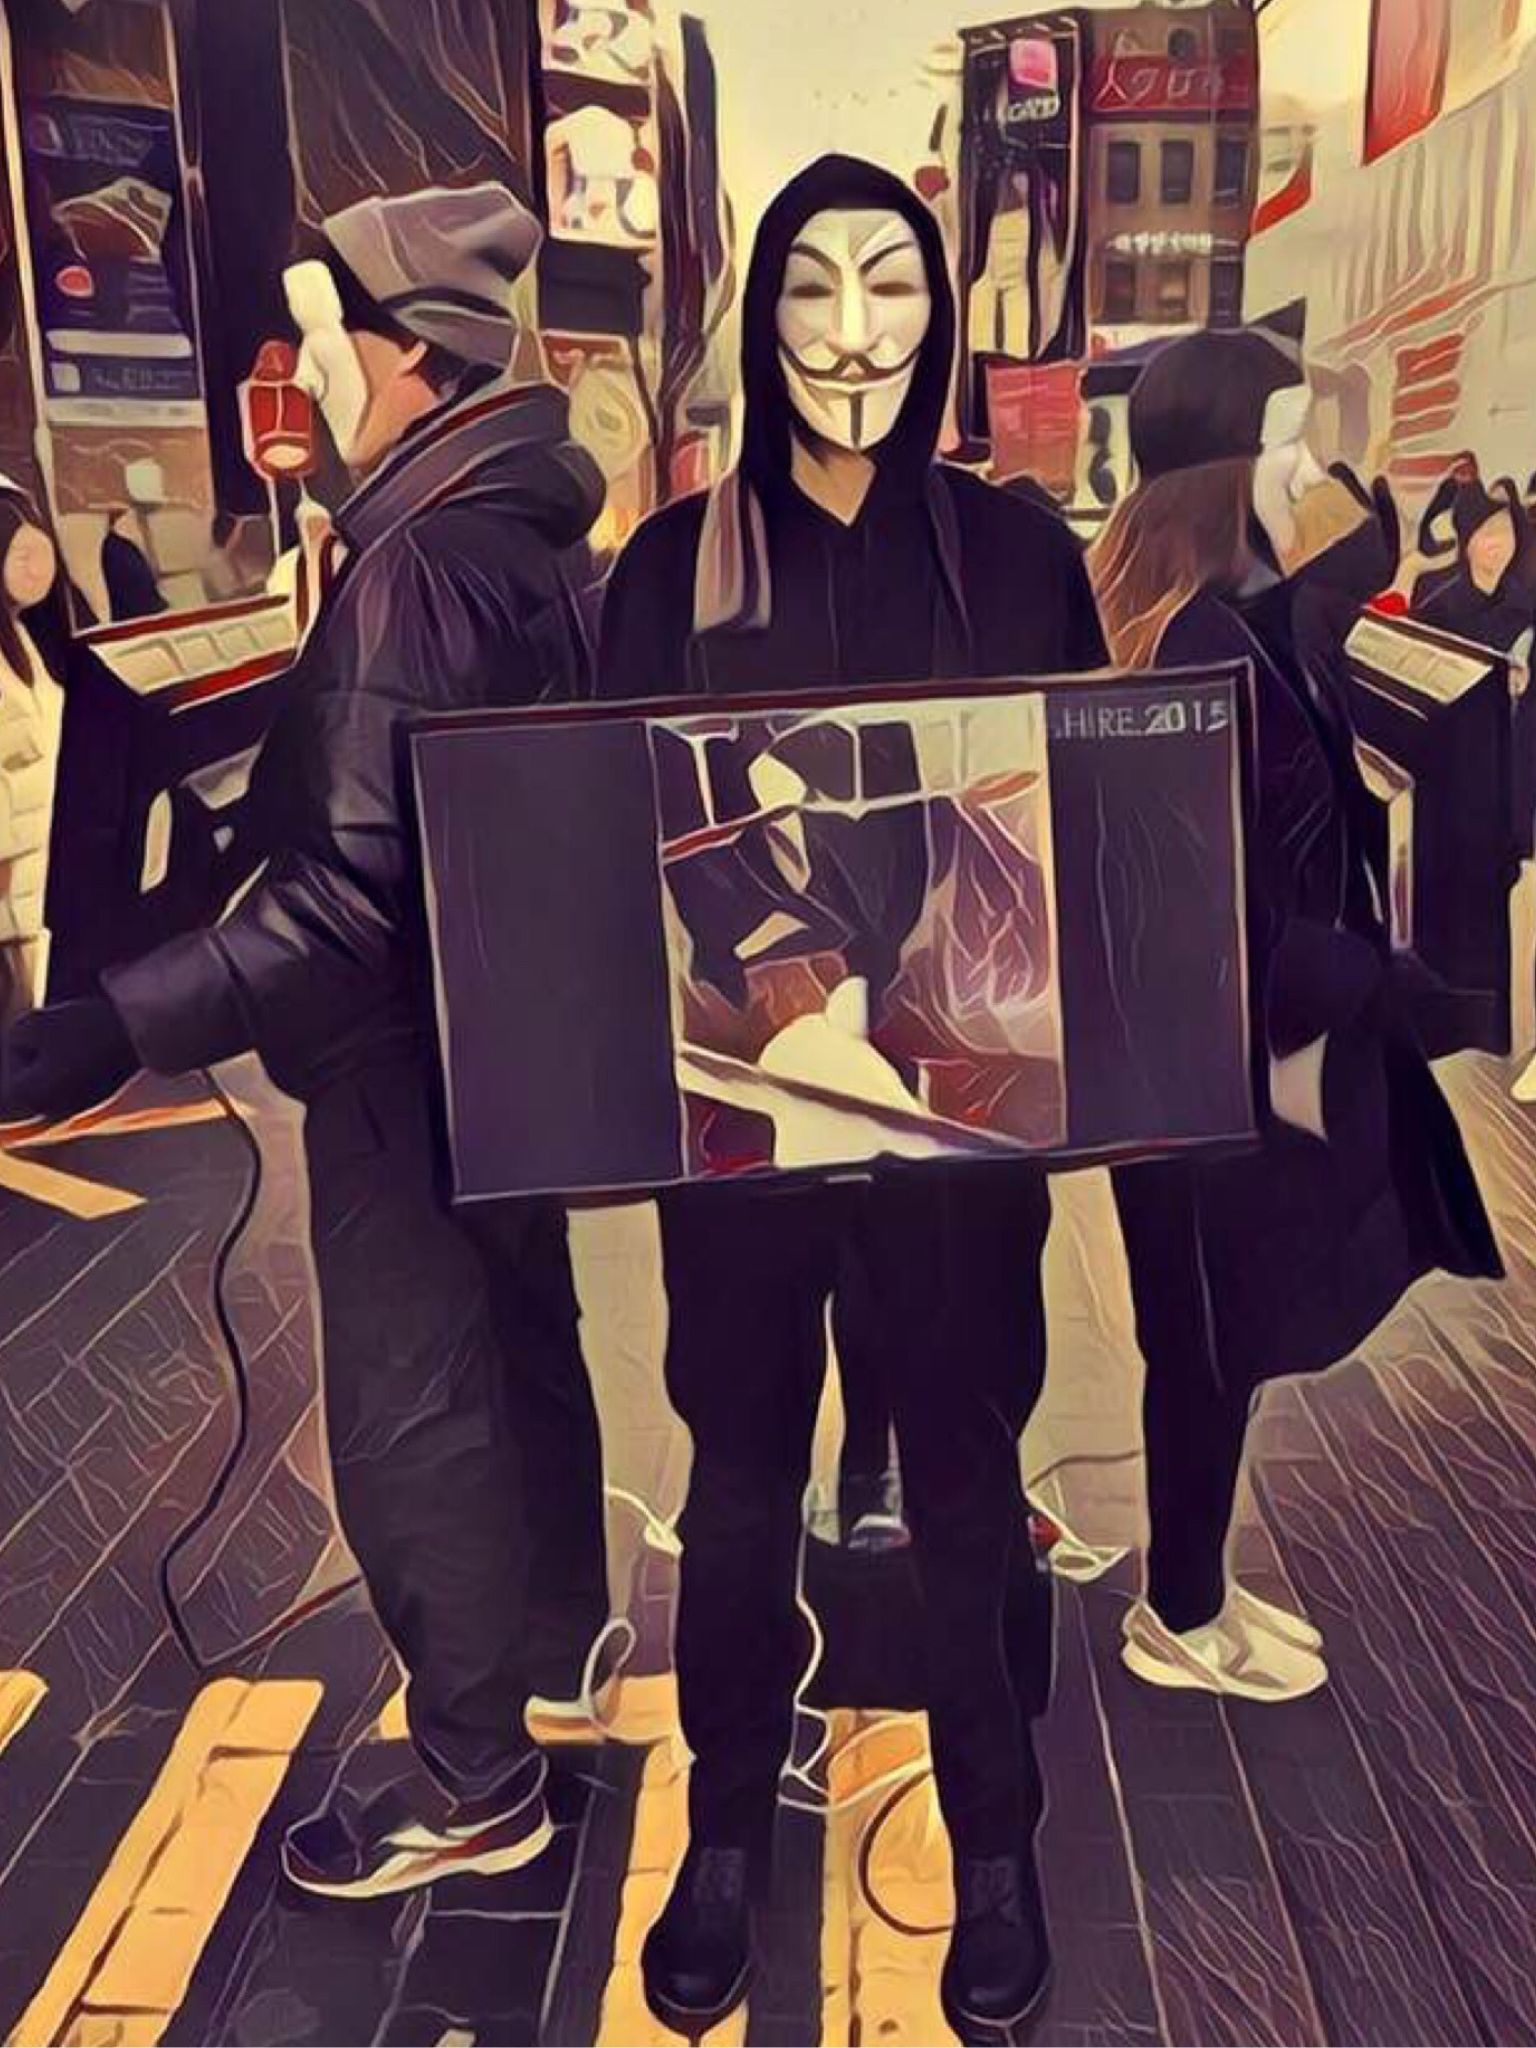 Vegan activists in Guy Fawkes masks display footage on laptops in Myeong-dong, Seoul, in this slightly blurry filtered image.